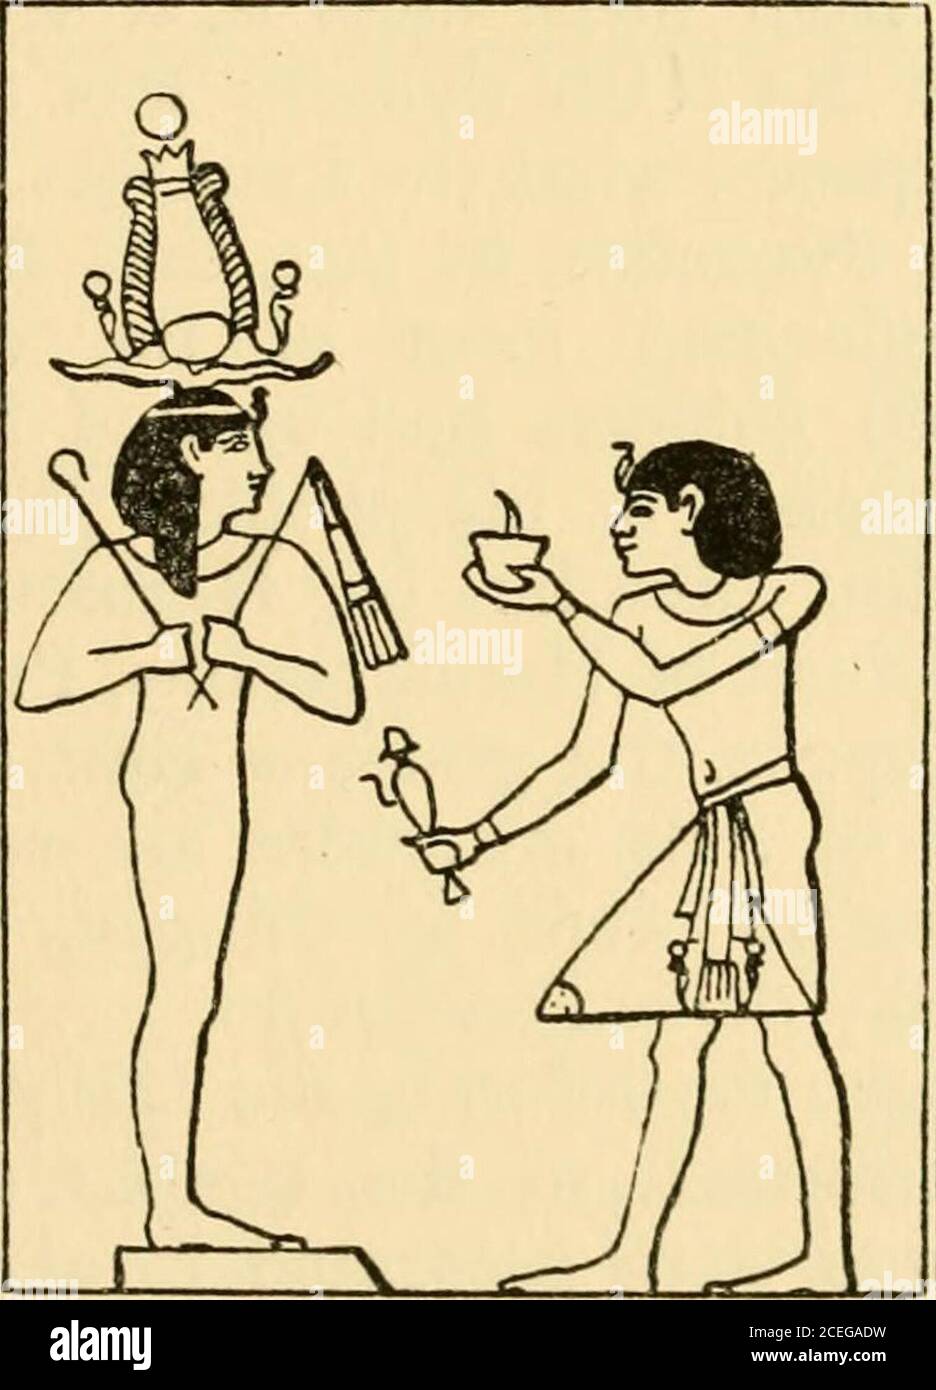 . Osiris and the Egyptian resurrection;. Seti I pouring out a libationto Osiris.Mariette, Abydos^ Vol.I, p. 37. A priest pouring out a libation over Osiris. Mariette, Abydos^ Vol. I, p. 72.. Seti I offering incense and a libation to Osiris.Mariette, Abydos, Vol. I, p. 58. and men of high rank under the Ancient Empire, andthe texts and ceremonies were intended to supply thespirits of the dead with everything which was necessaryfor their well-beine in the Other World. The meat and 254 Osiris and the Egyptian Resurrection drink offerings were scores in number, and each thingwas presented with app Stock Photo